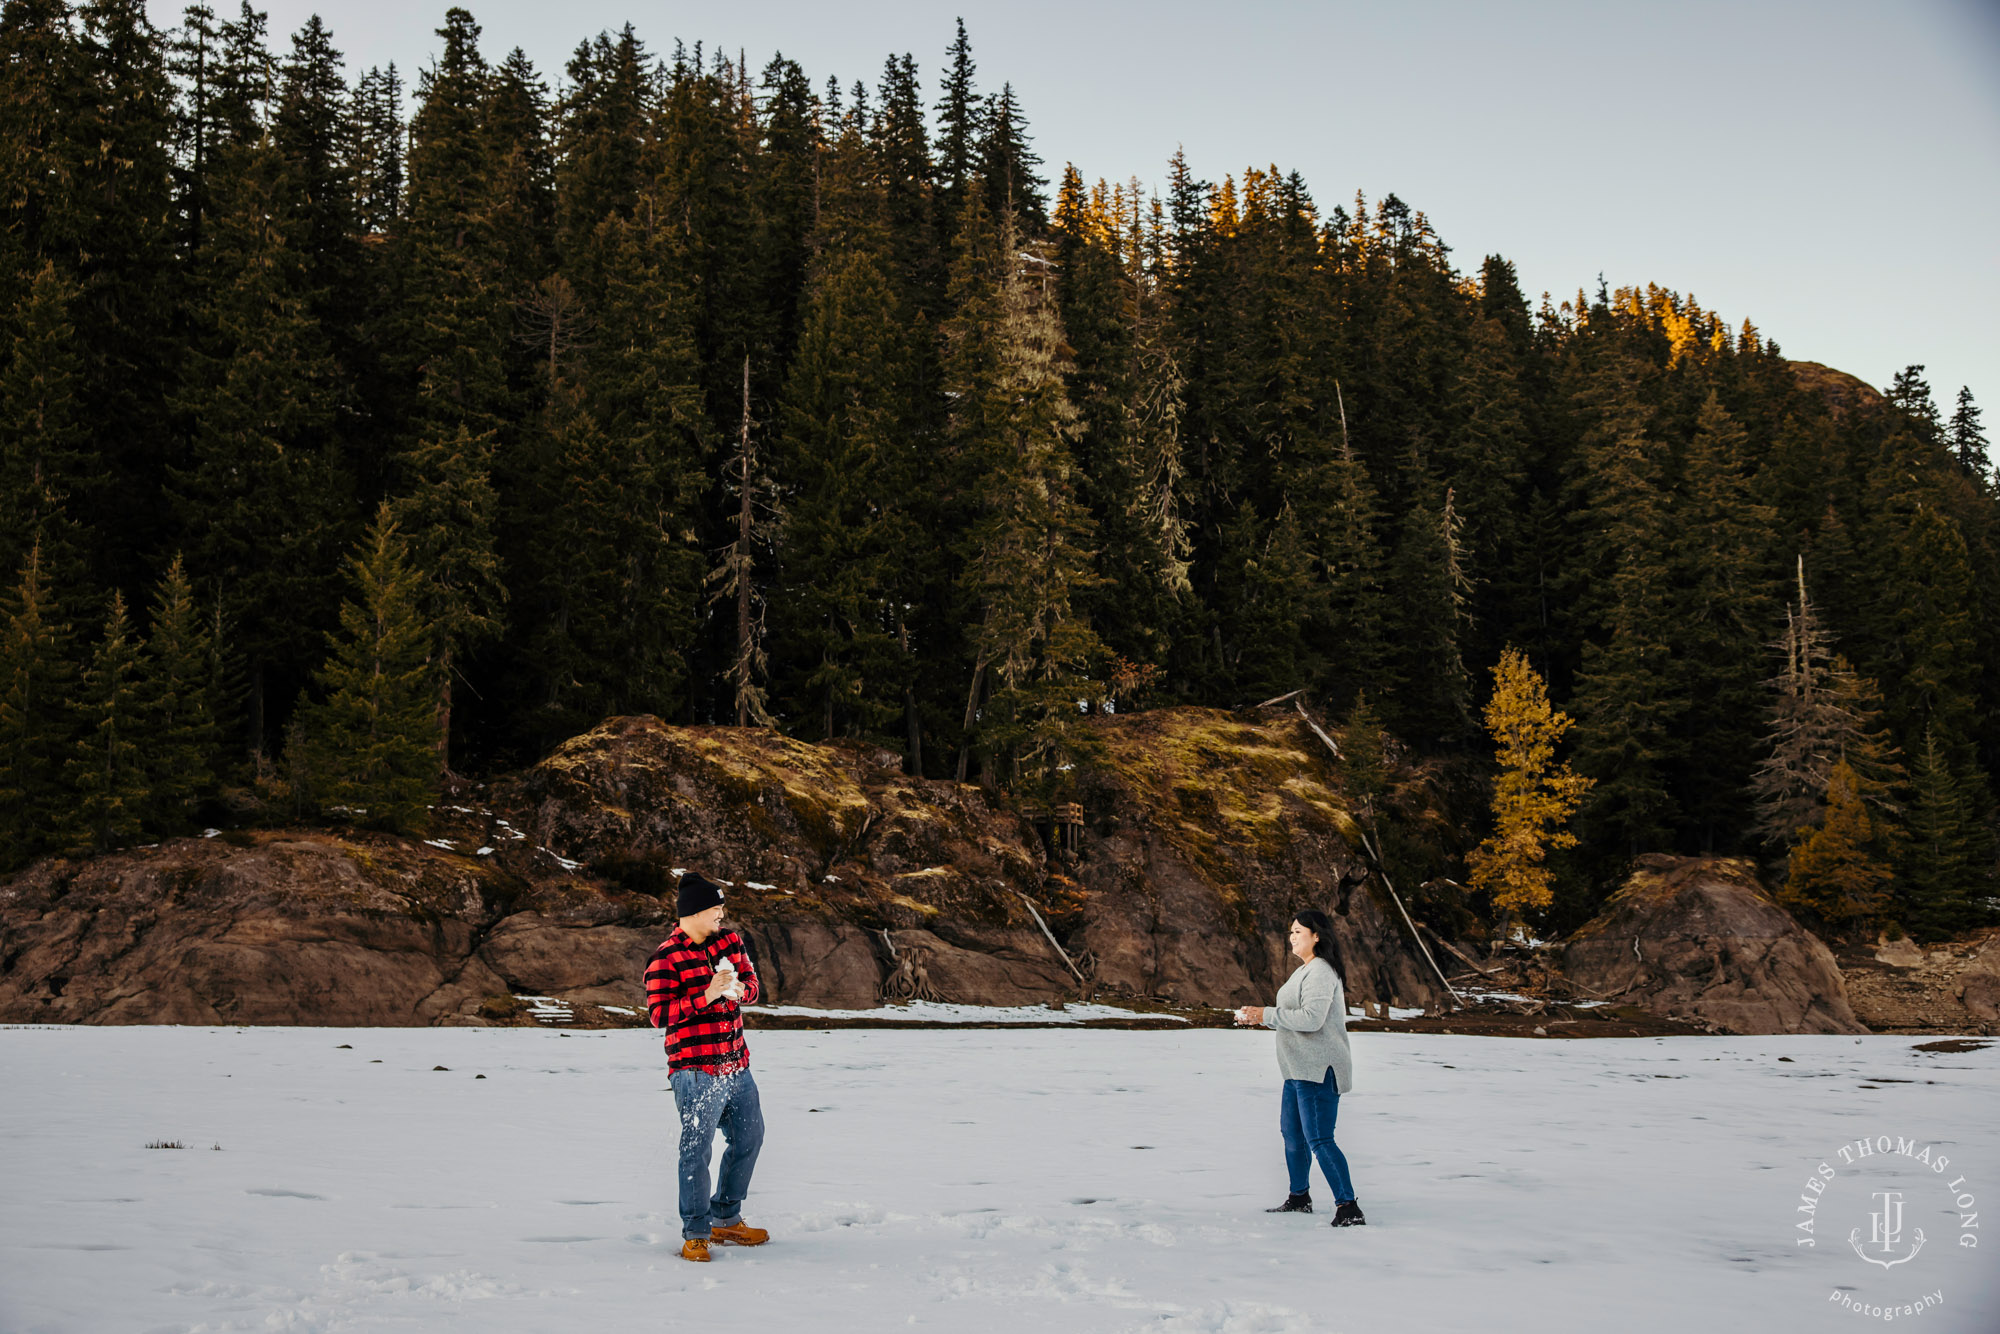 Adventure engagement session in the snow by Seattle adventure wedding photographer James Thomas Long Photography